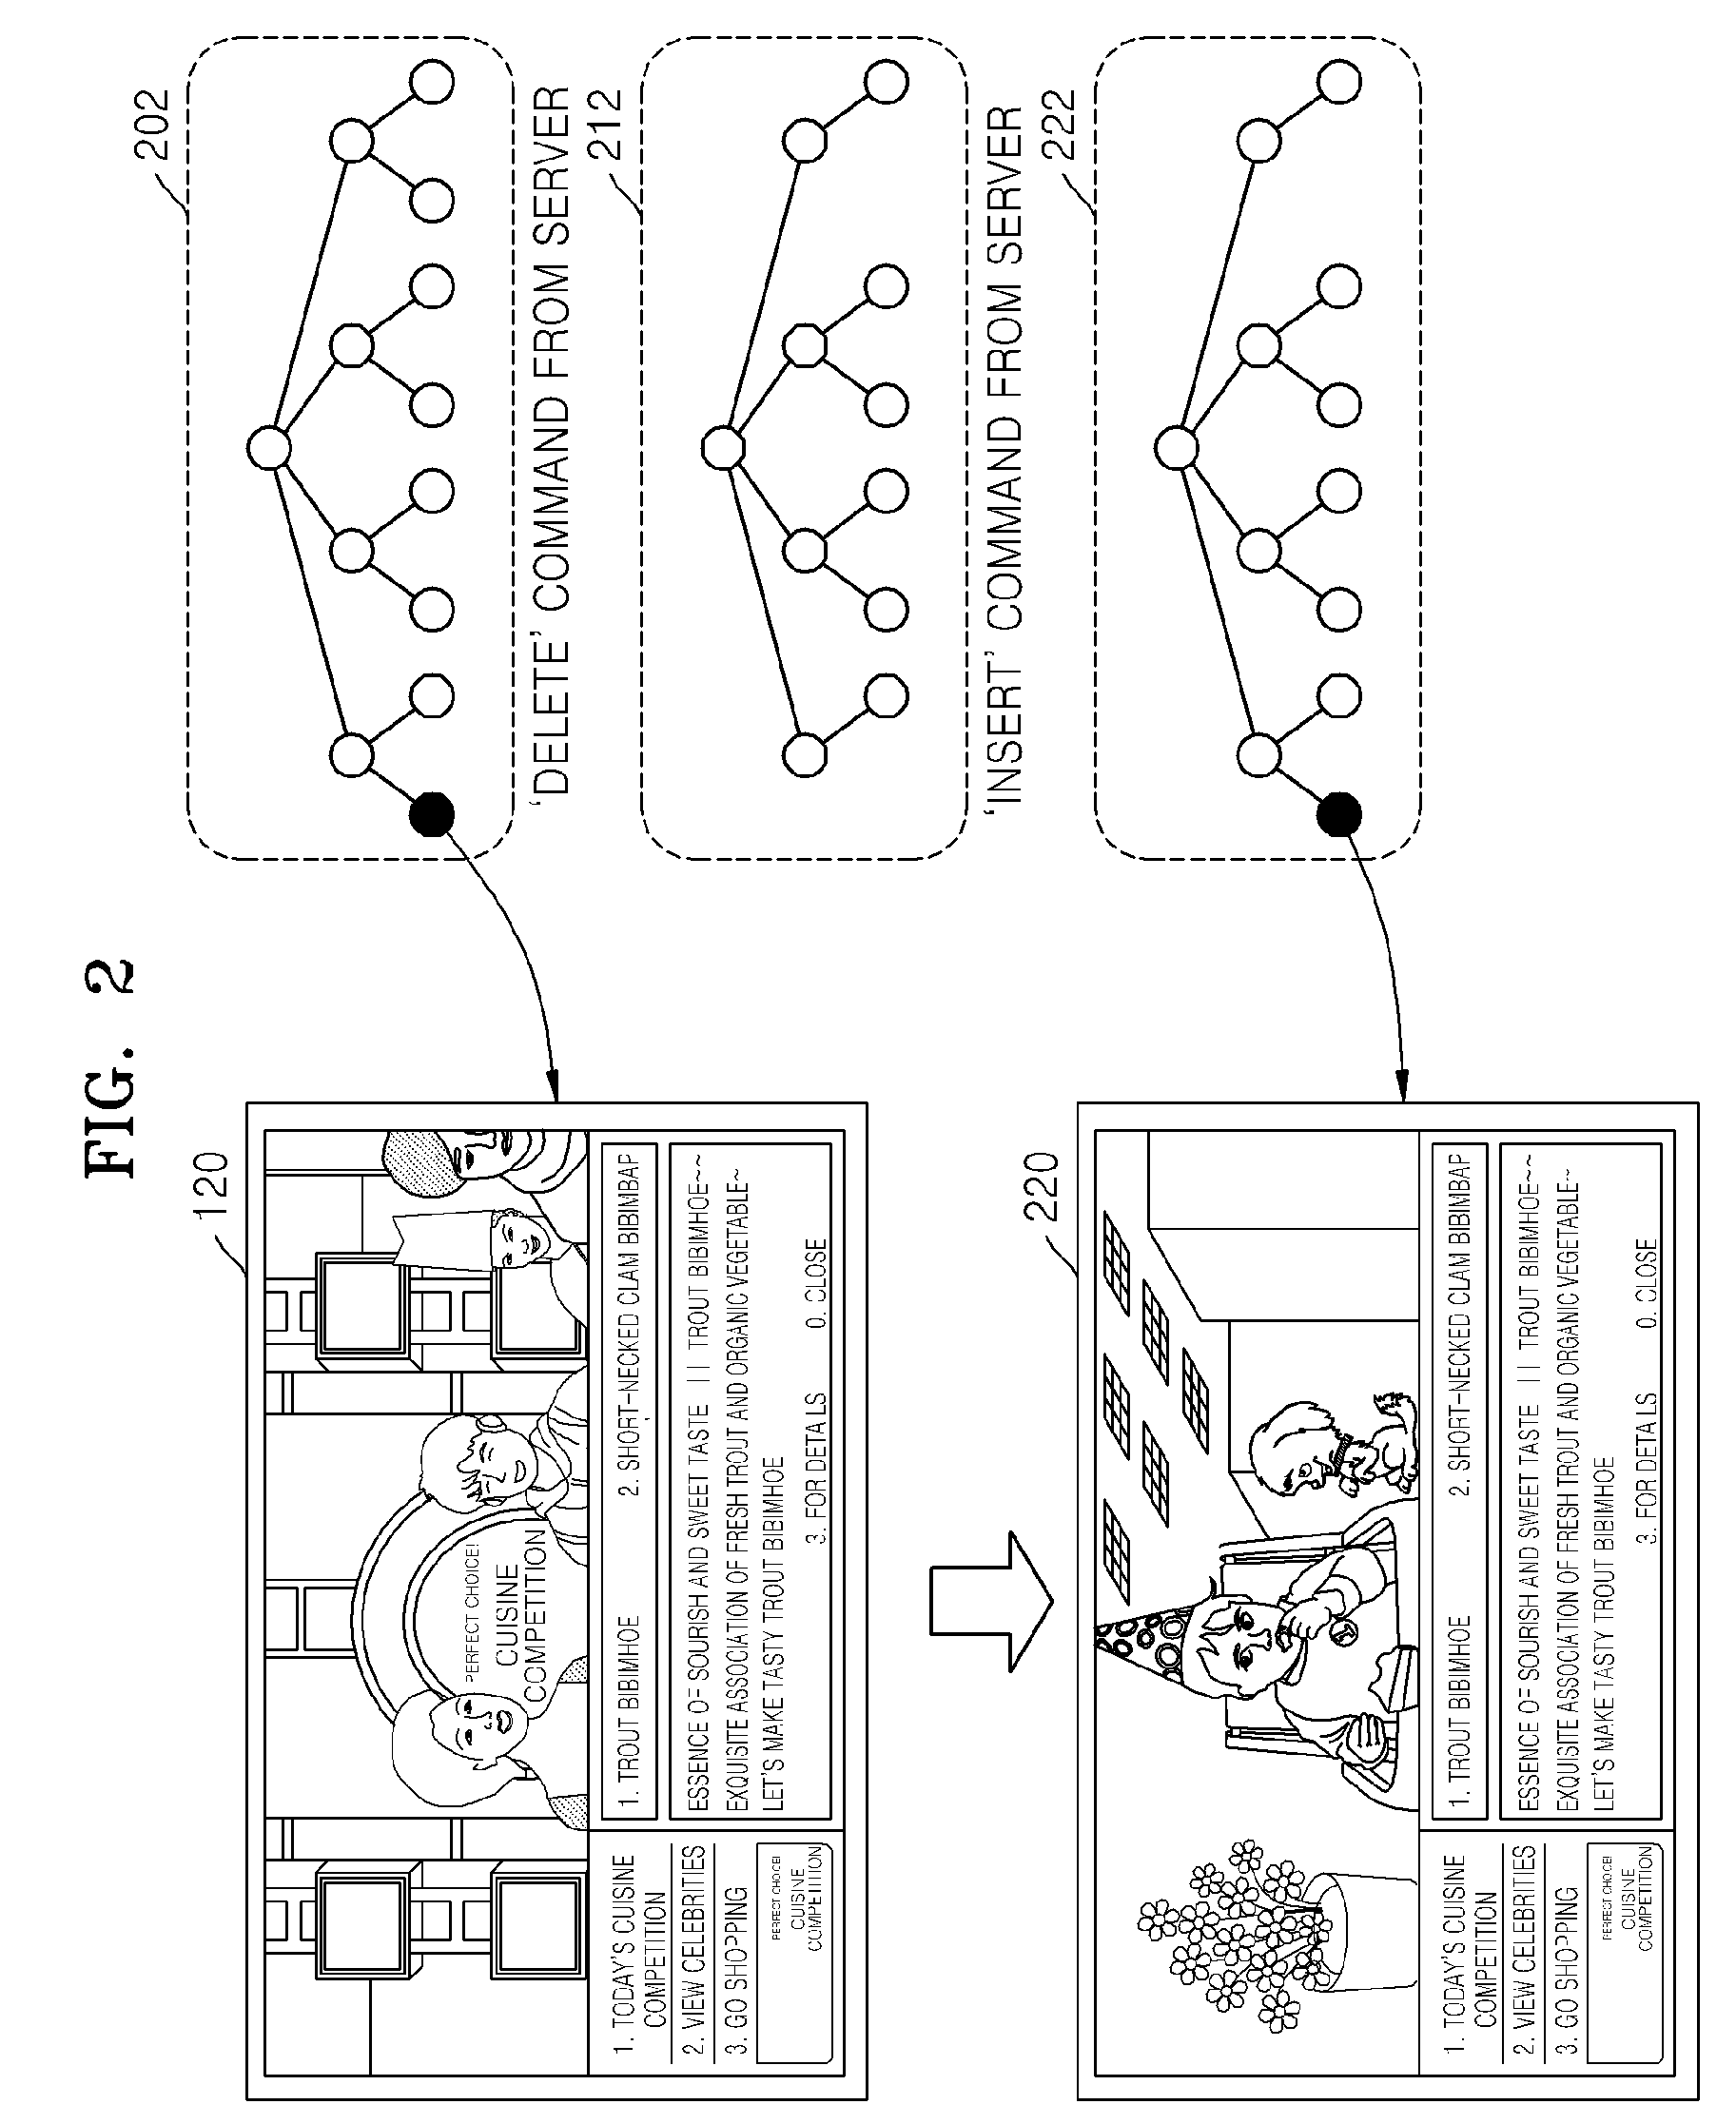 Method and apparatus for generating media-exchangeable multimedia data, and method and apparatus for reconstructing media-exchangeable multimedia data